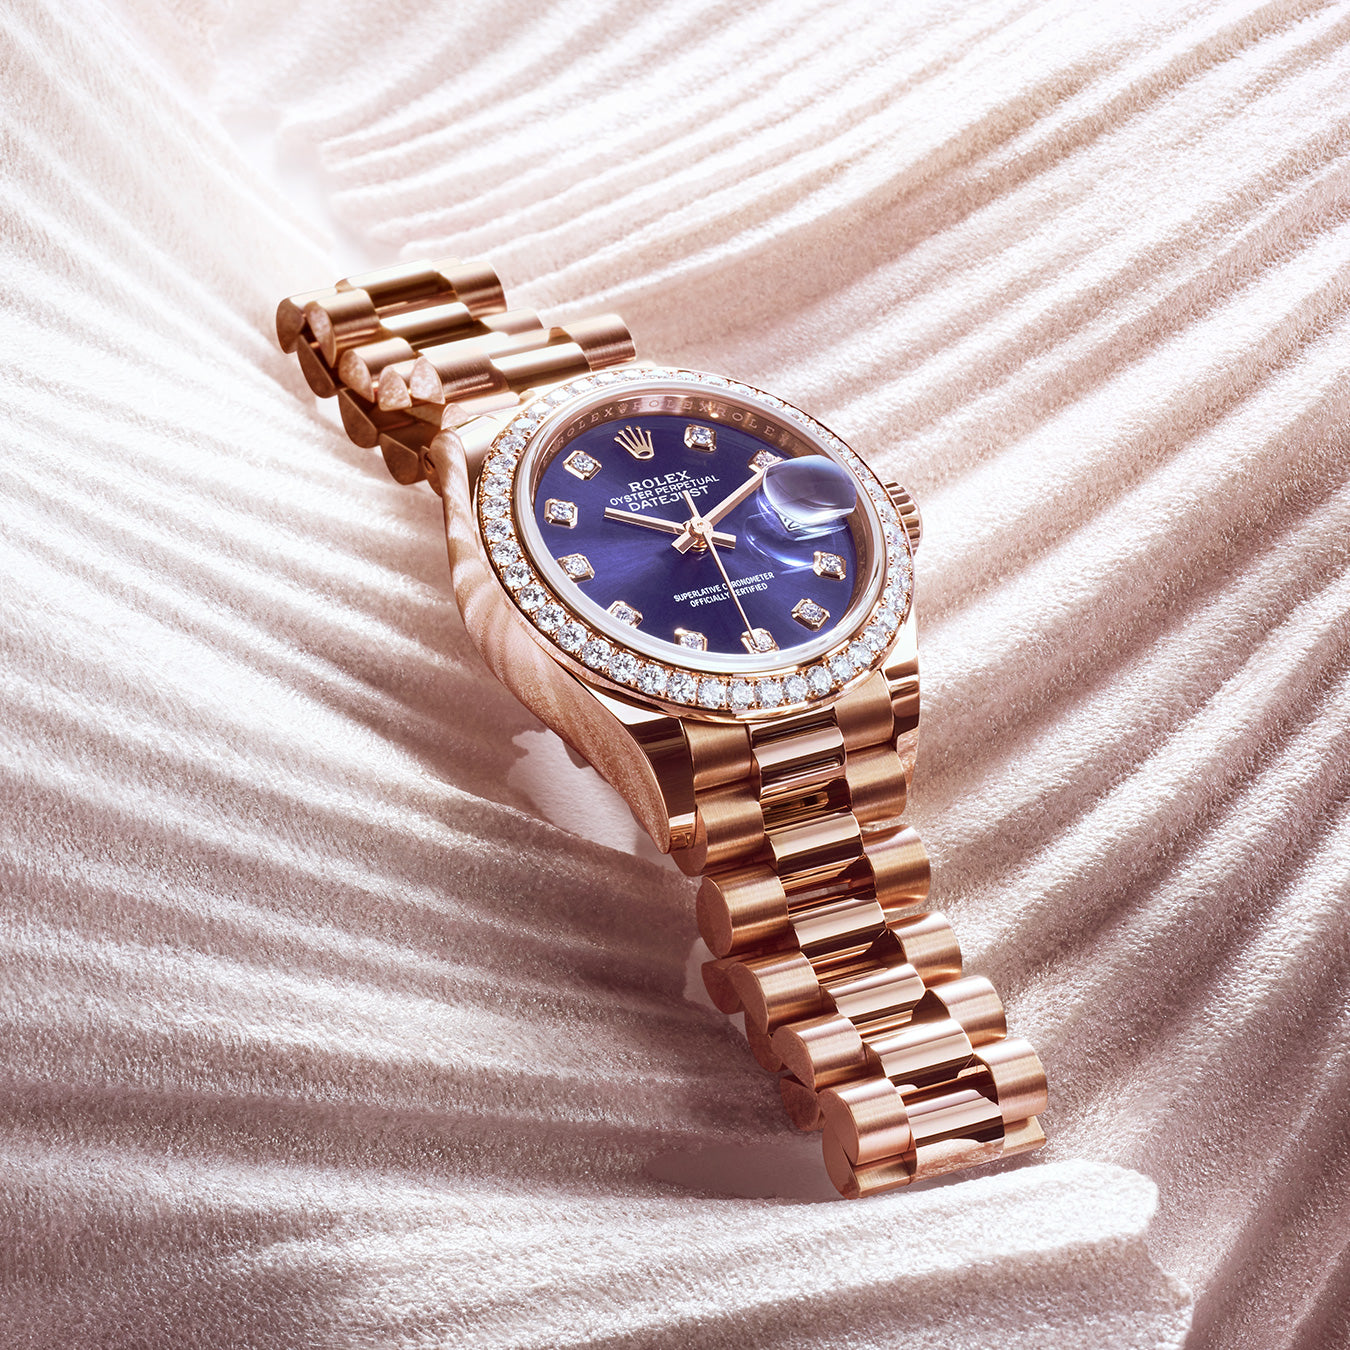 The Audacity of Excellence The Lady-Datejust